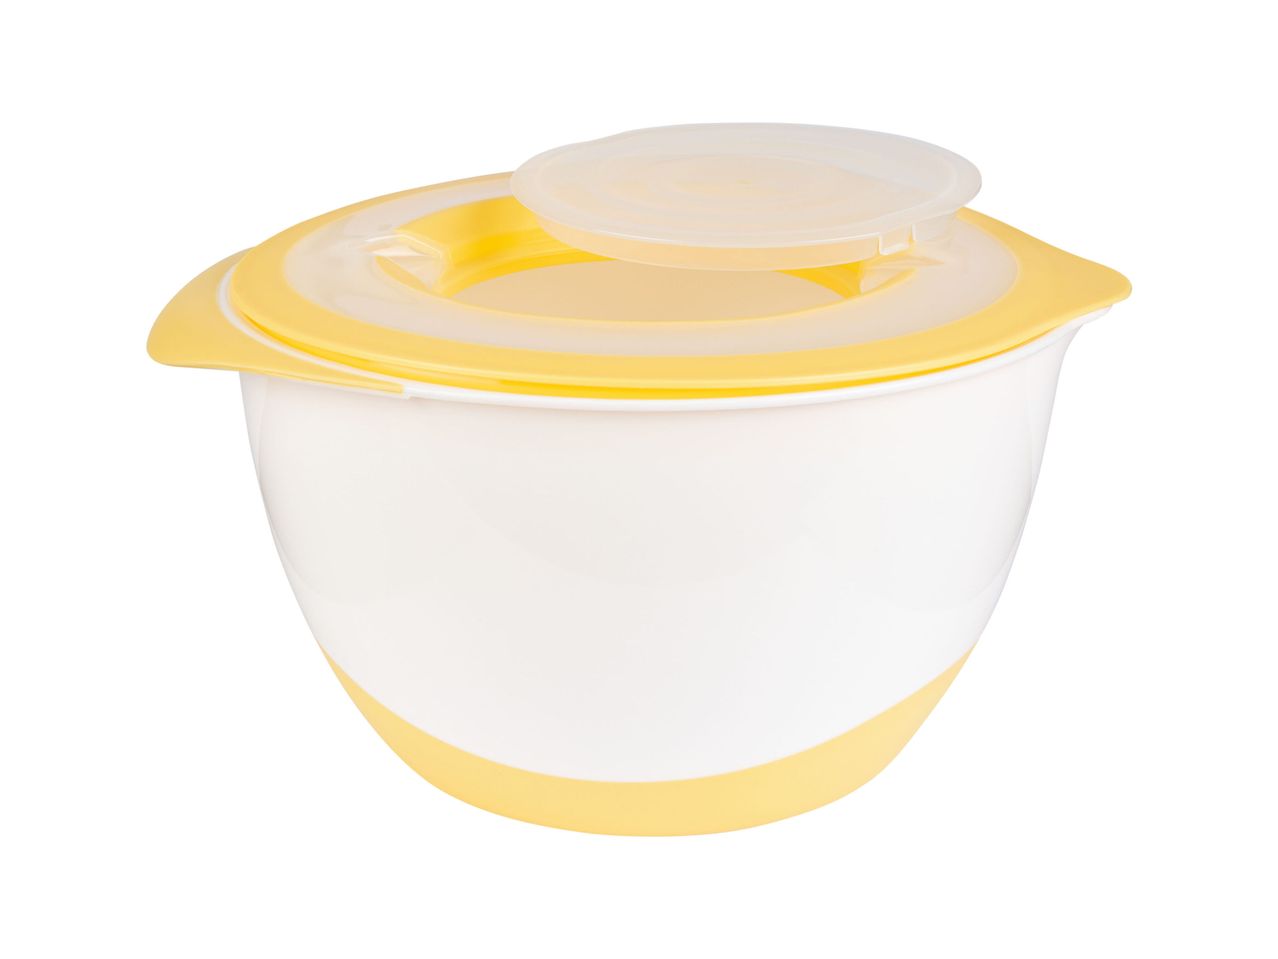 Go to full screen view: Mixing Bowl with Lid - Image 2